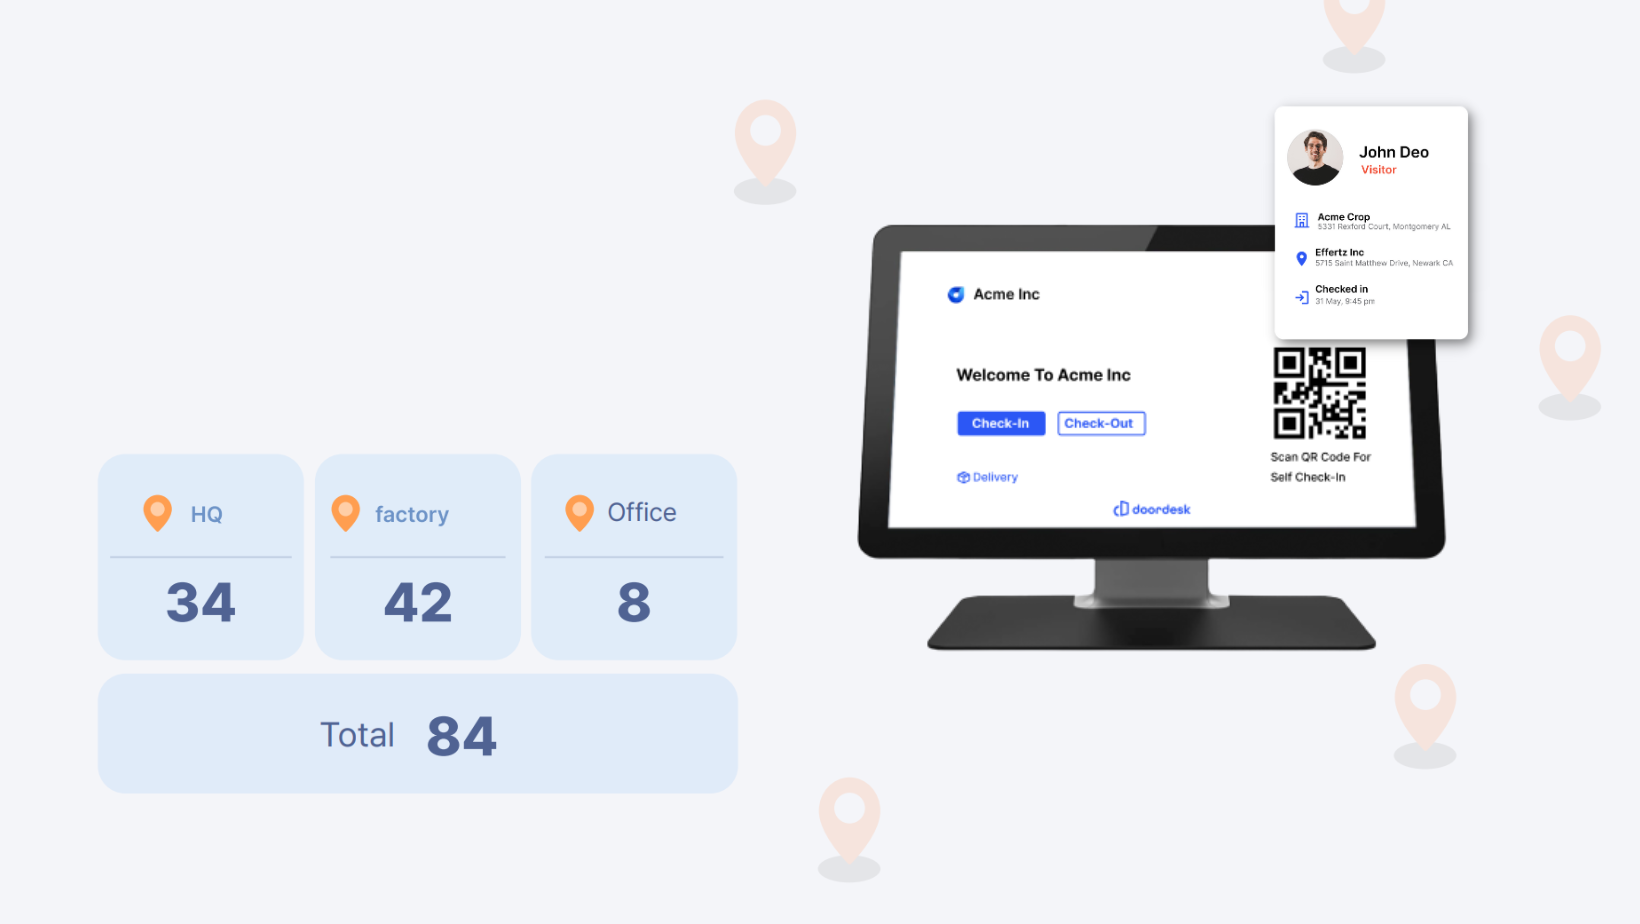 DoorDesk excels in multi-location visitor management. With its robust features, it enables businesses to efficiently manage visitors across different locations, streamlining the process, enhancing security, and providing a cohesive visitor experience